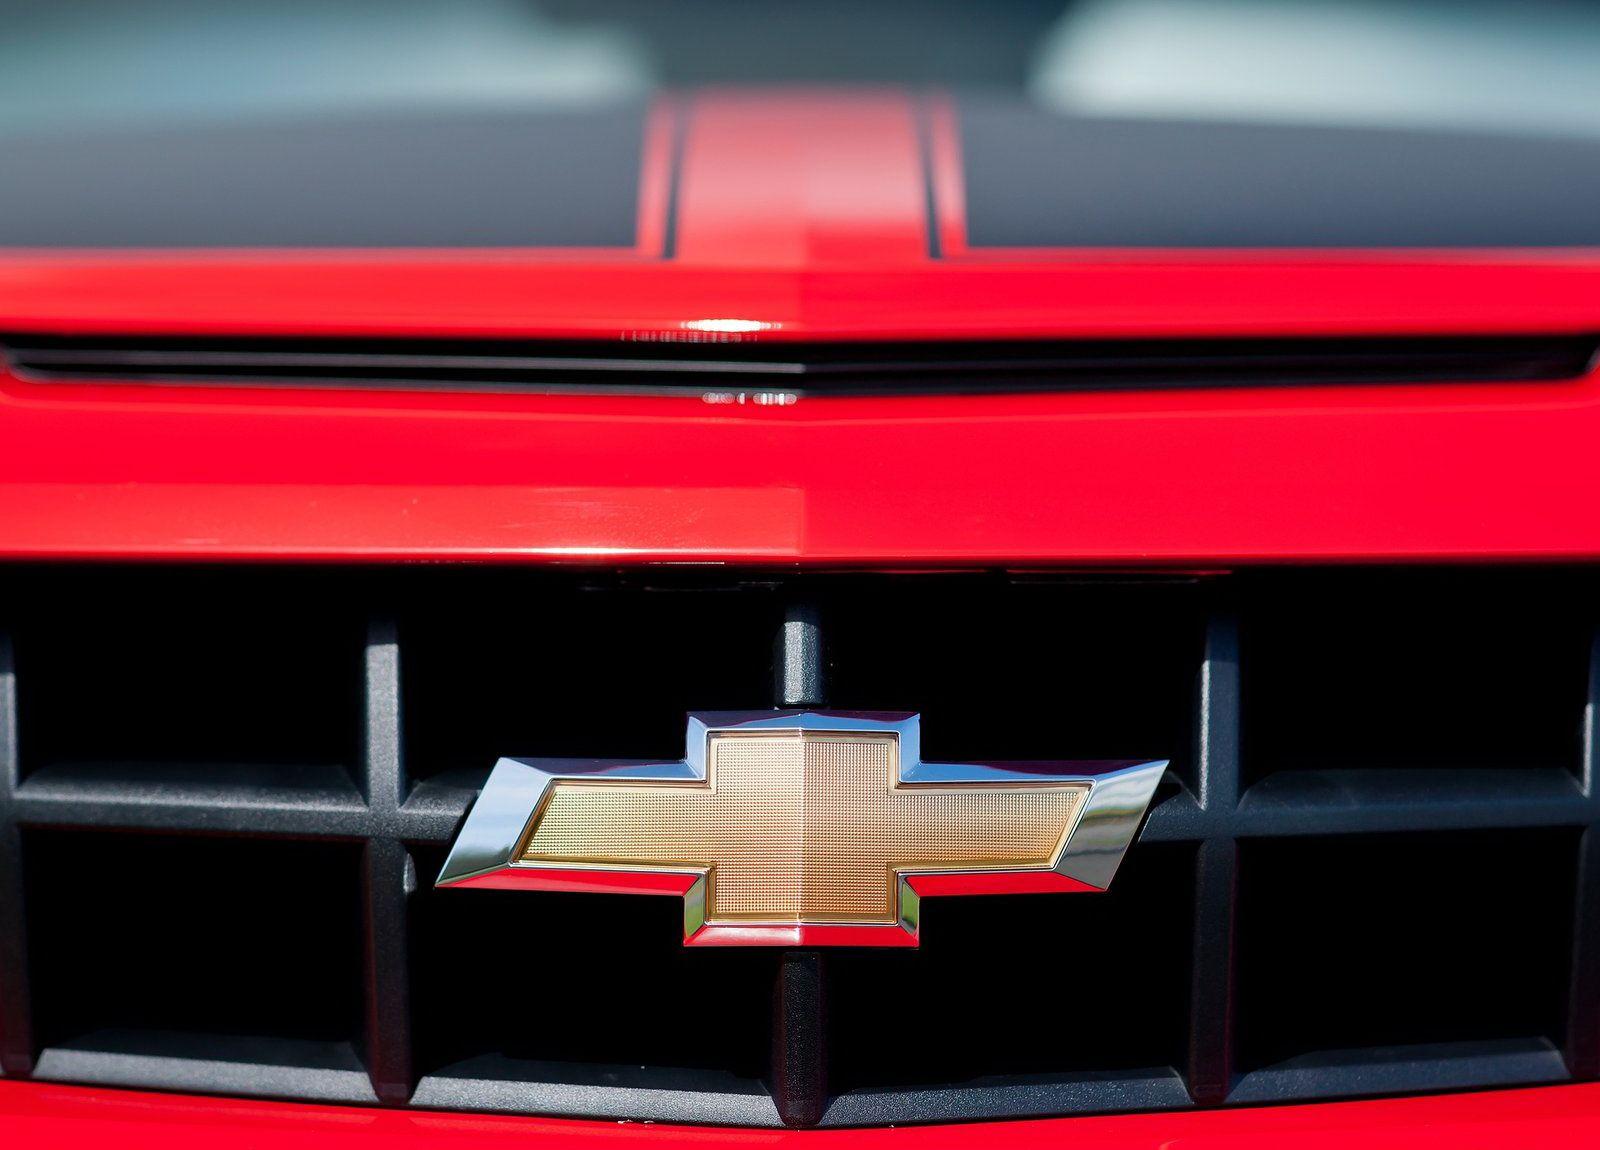 Simple Red Car Logo - Chevy Logo, Chevrolet Car Symbol Meaning and History | Car Brand ...